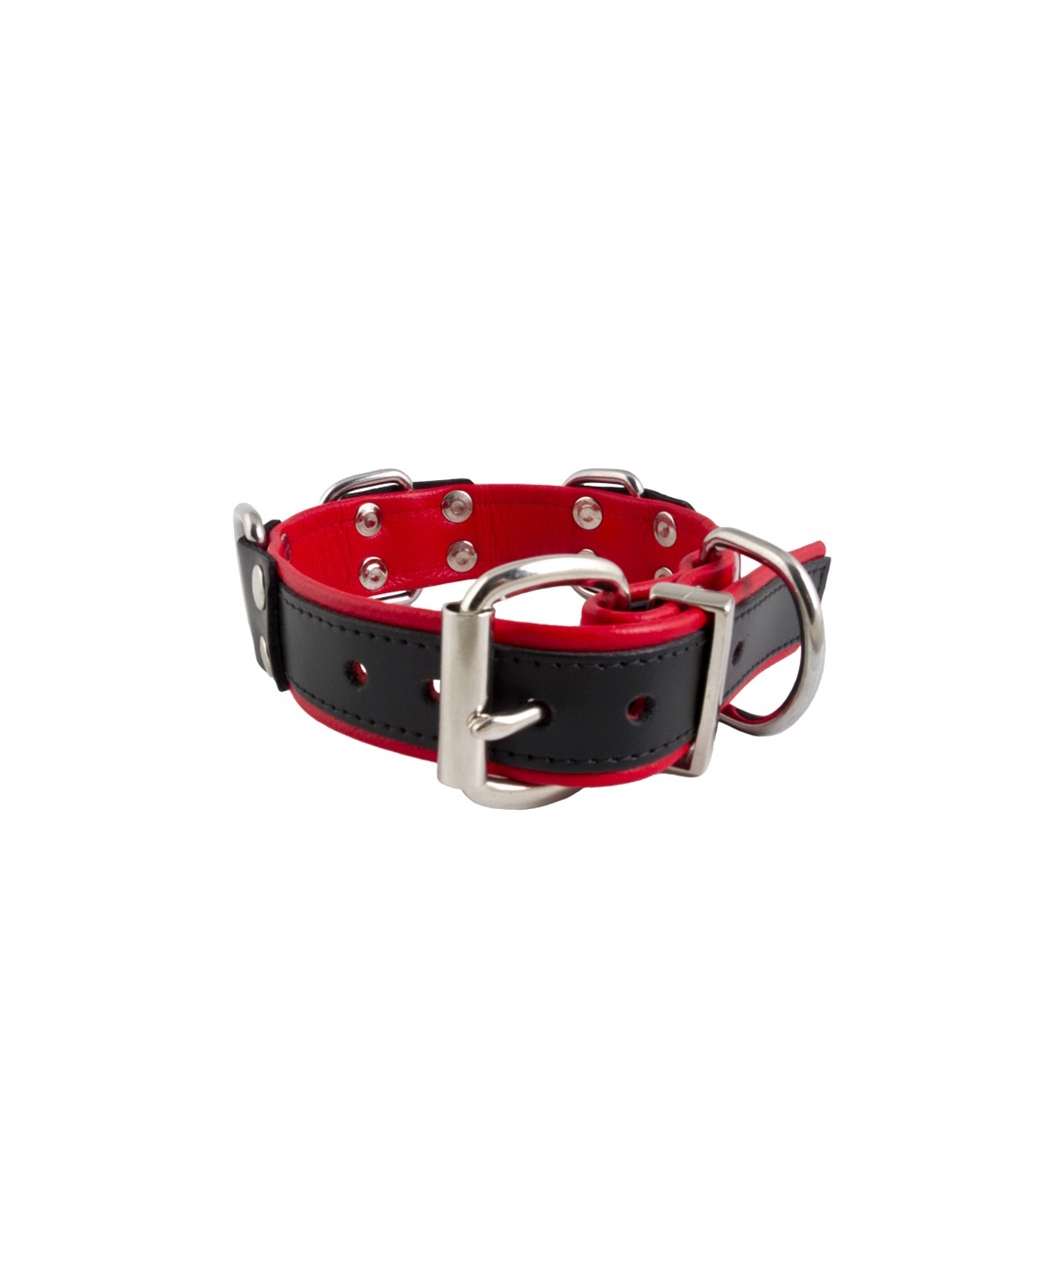 Mister B slave collar with 4 D-rings